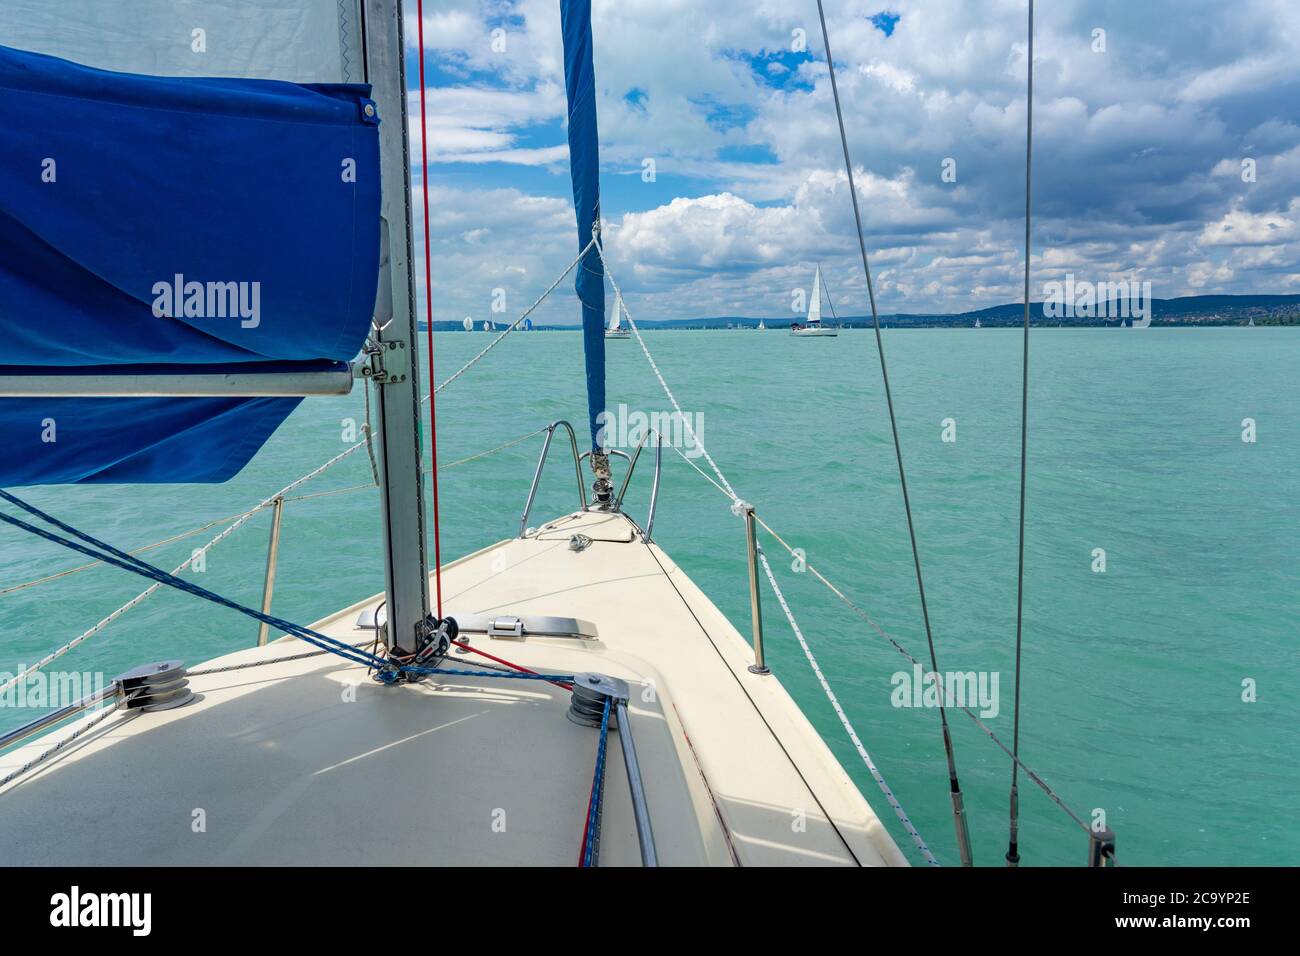 Sailboat on the lake Balaton ship prow view and other sailboats in the background Stock Photo